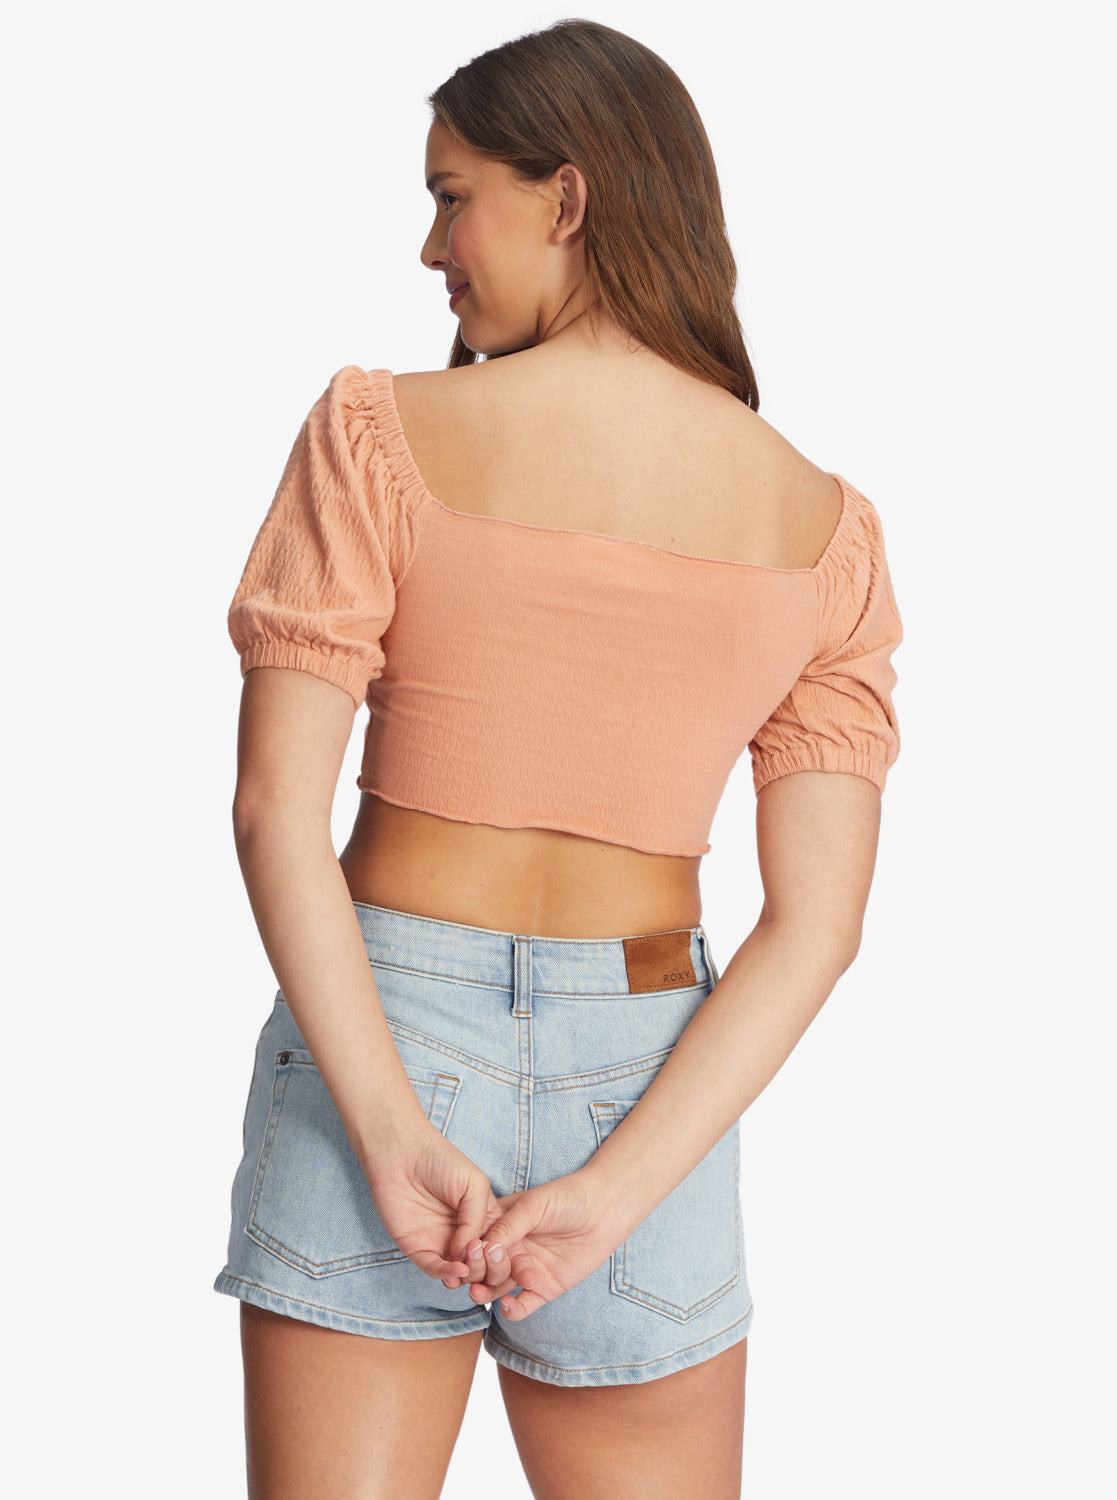 Flirty Walk - Ruched Cropped Top for Women - ARJKT03393